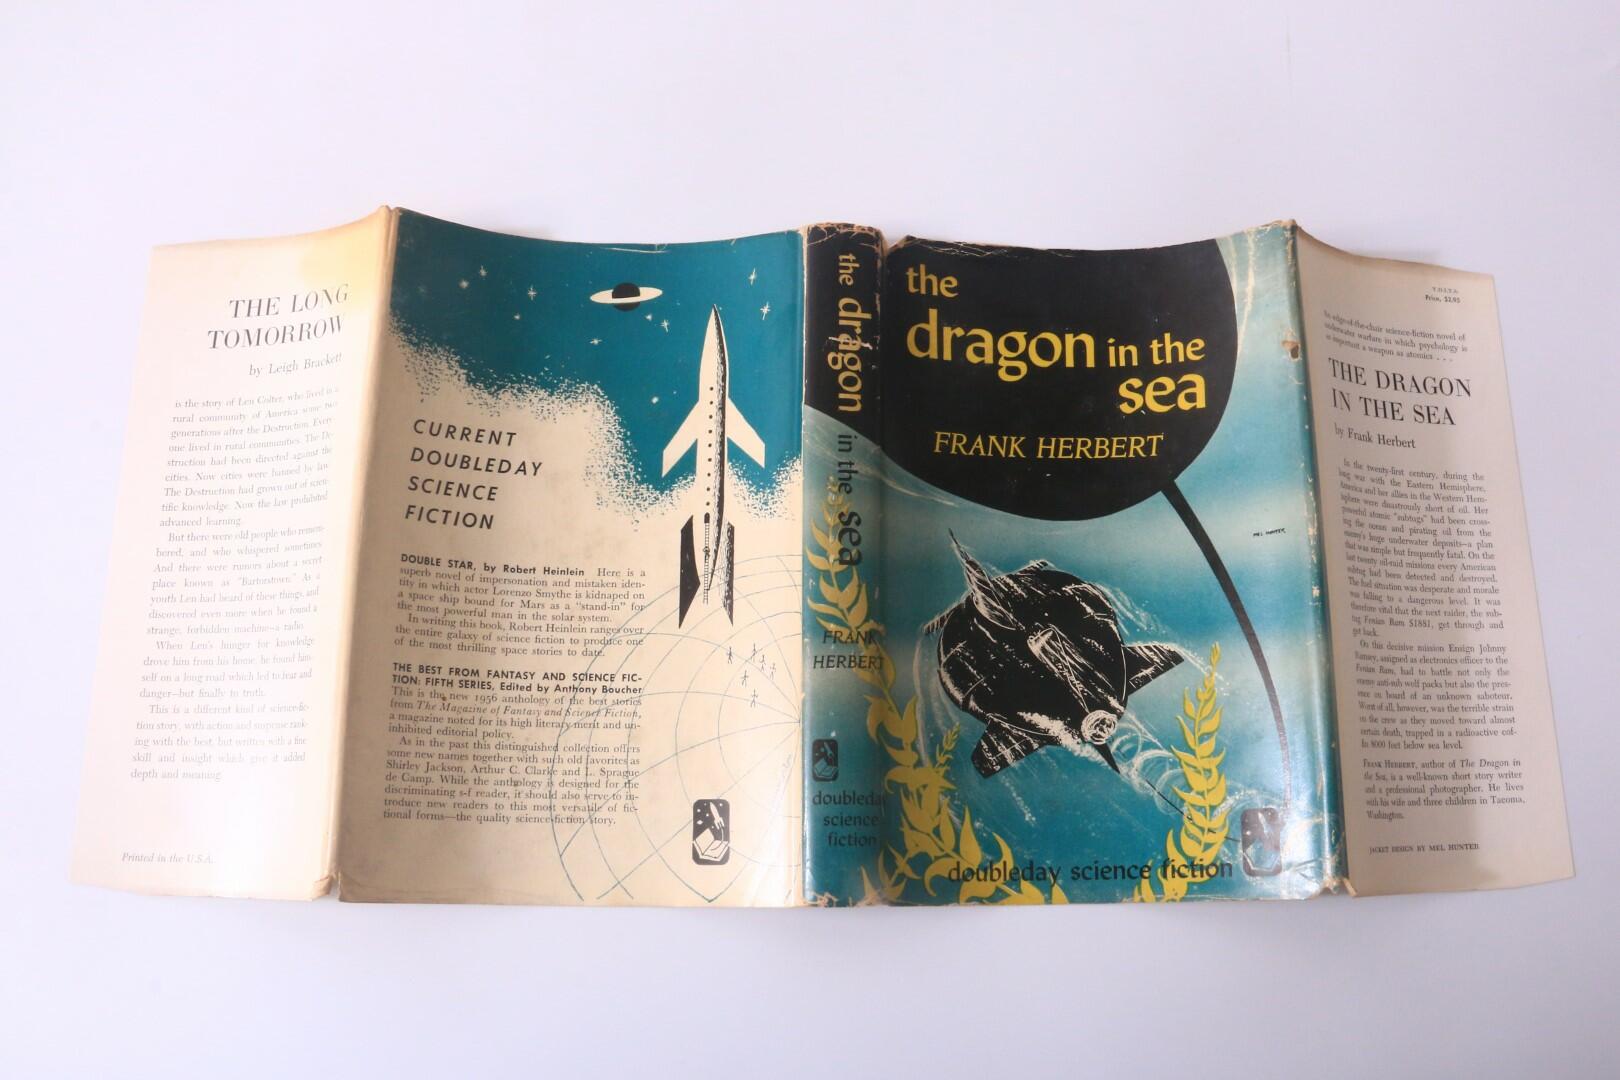 Frank Herbert - The Dragon in the Sea - Doubleday, 1956, Signed First Edition.